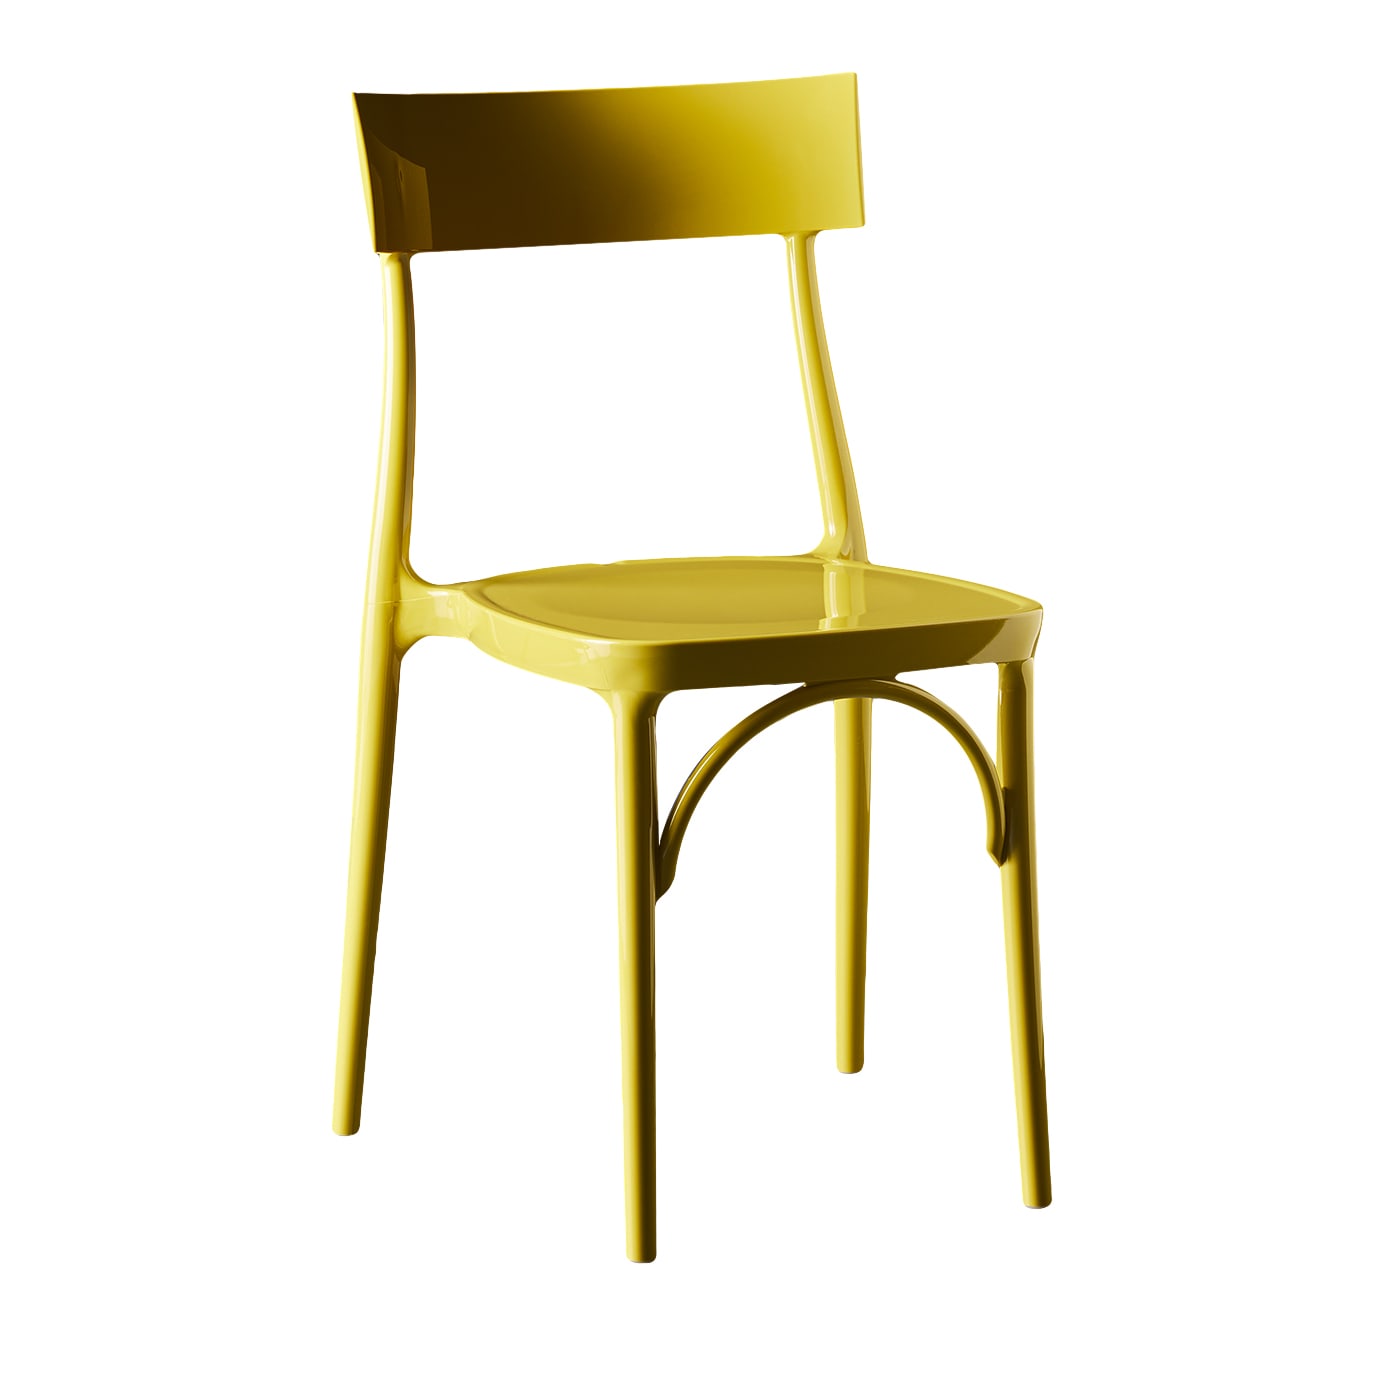 Set of 2 Milano 2015 Mustard Chairs - Colico